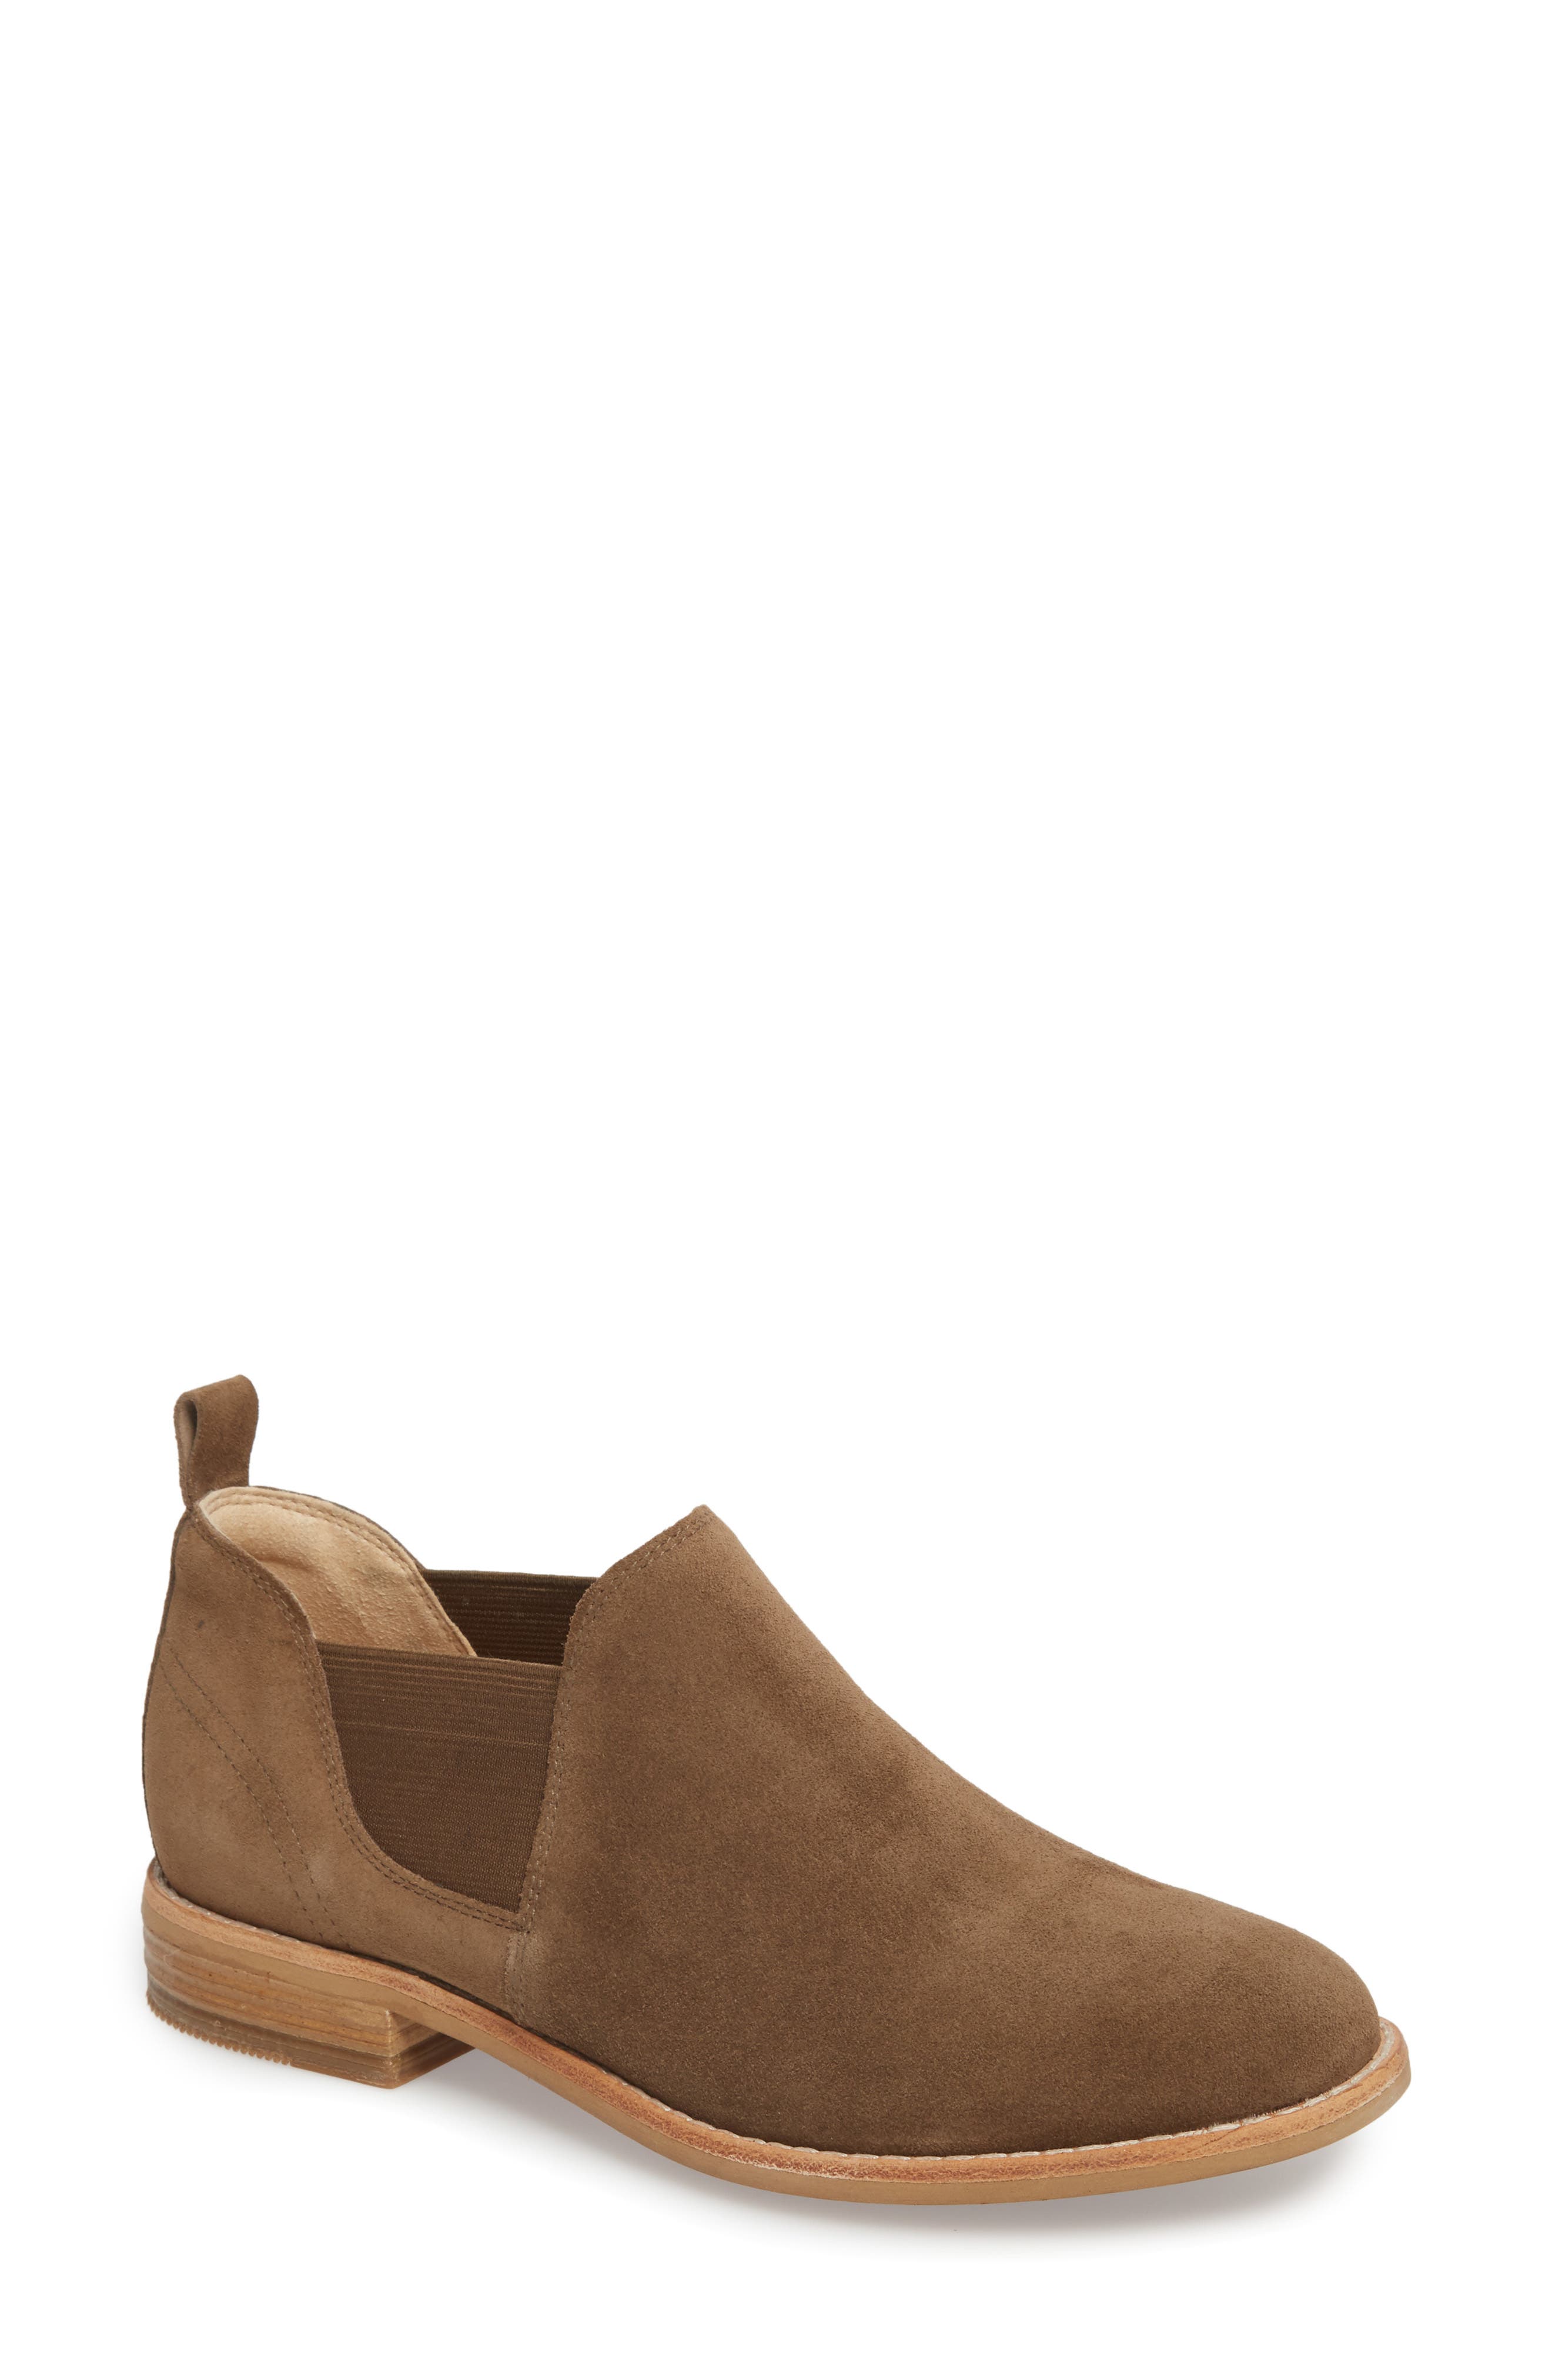 clarks collection women's edenvale page booties